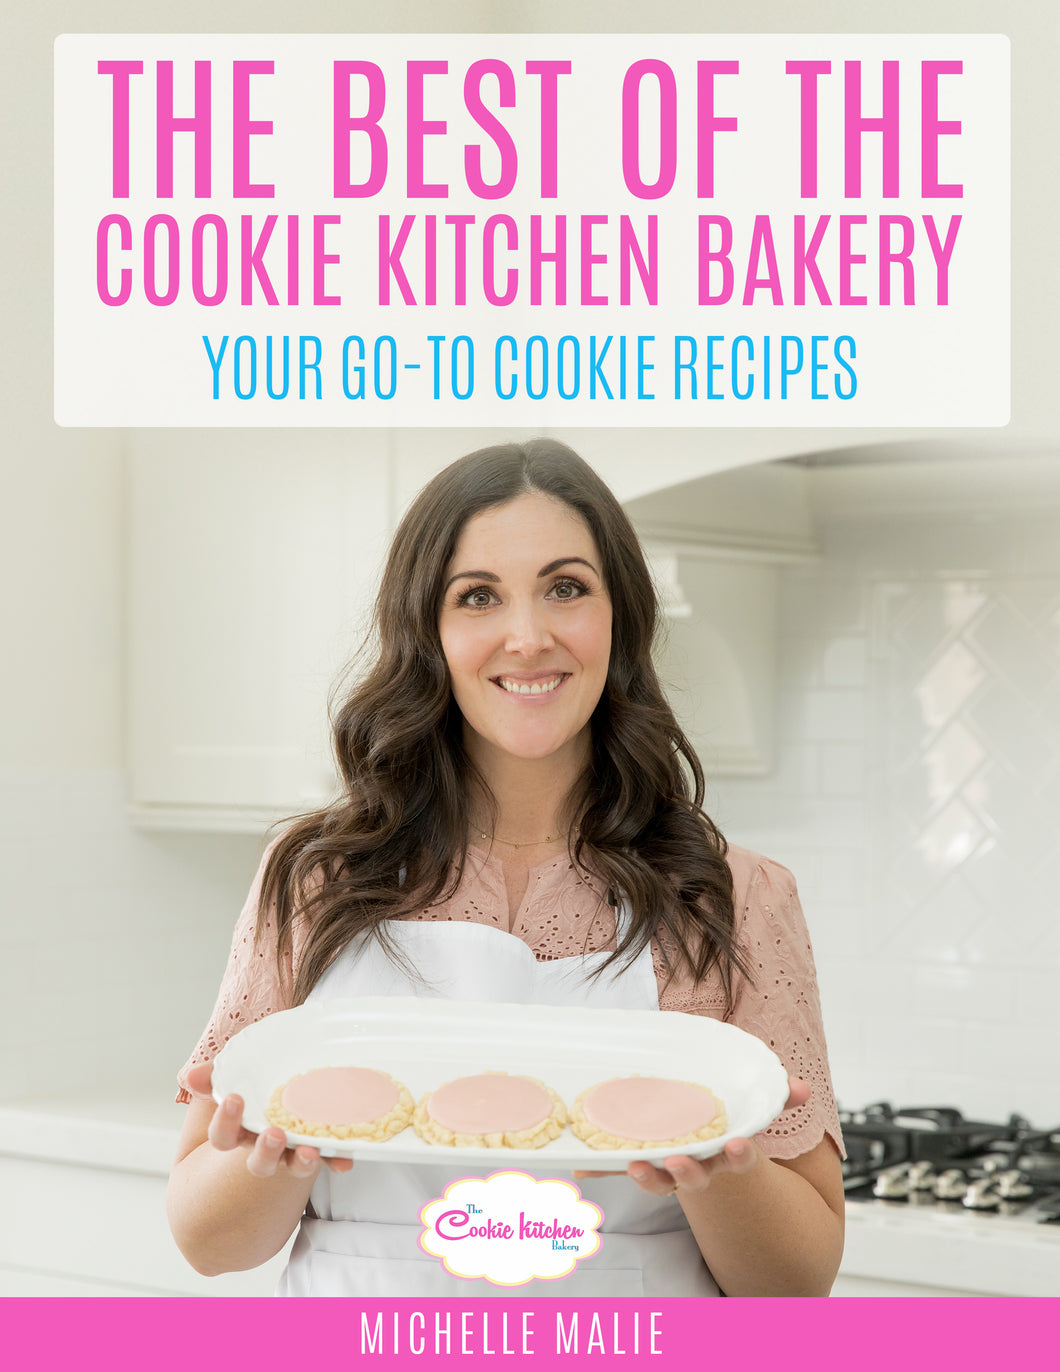 The BEST Of The Cookie Kitchen Bakery digital recipe book + Frosting edition!